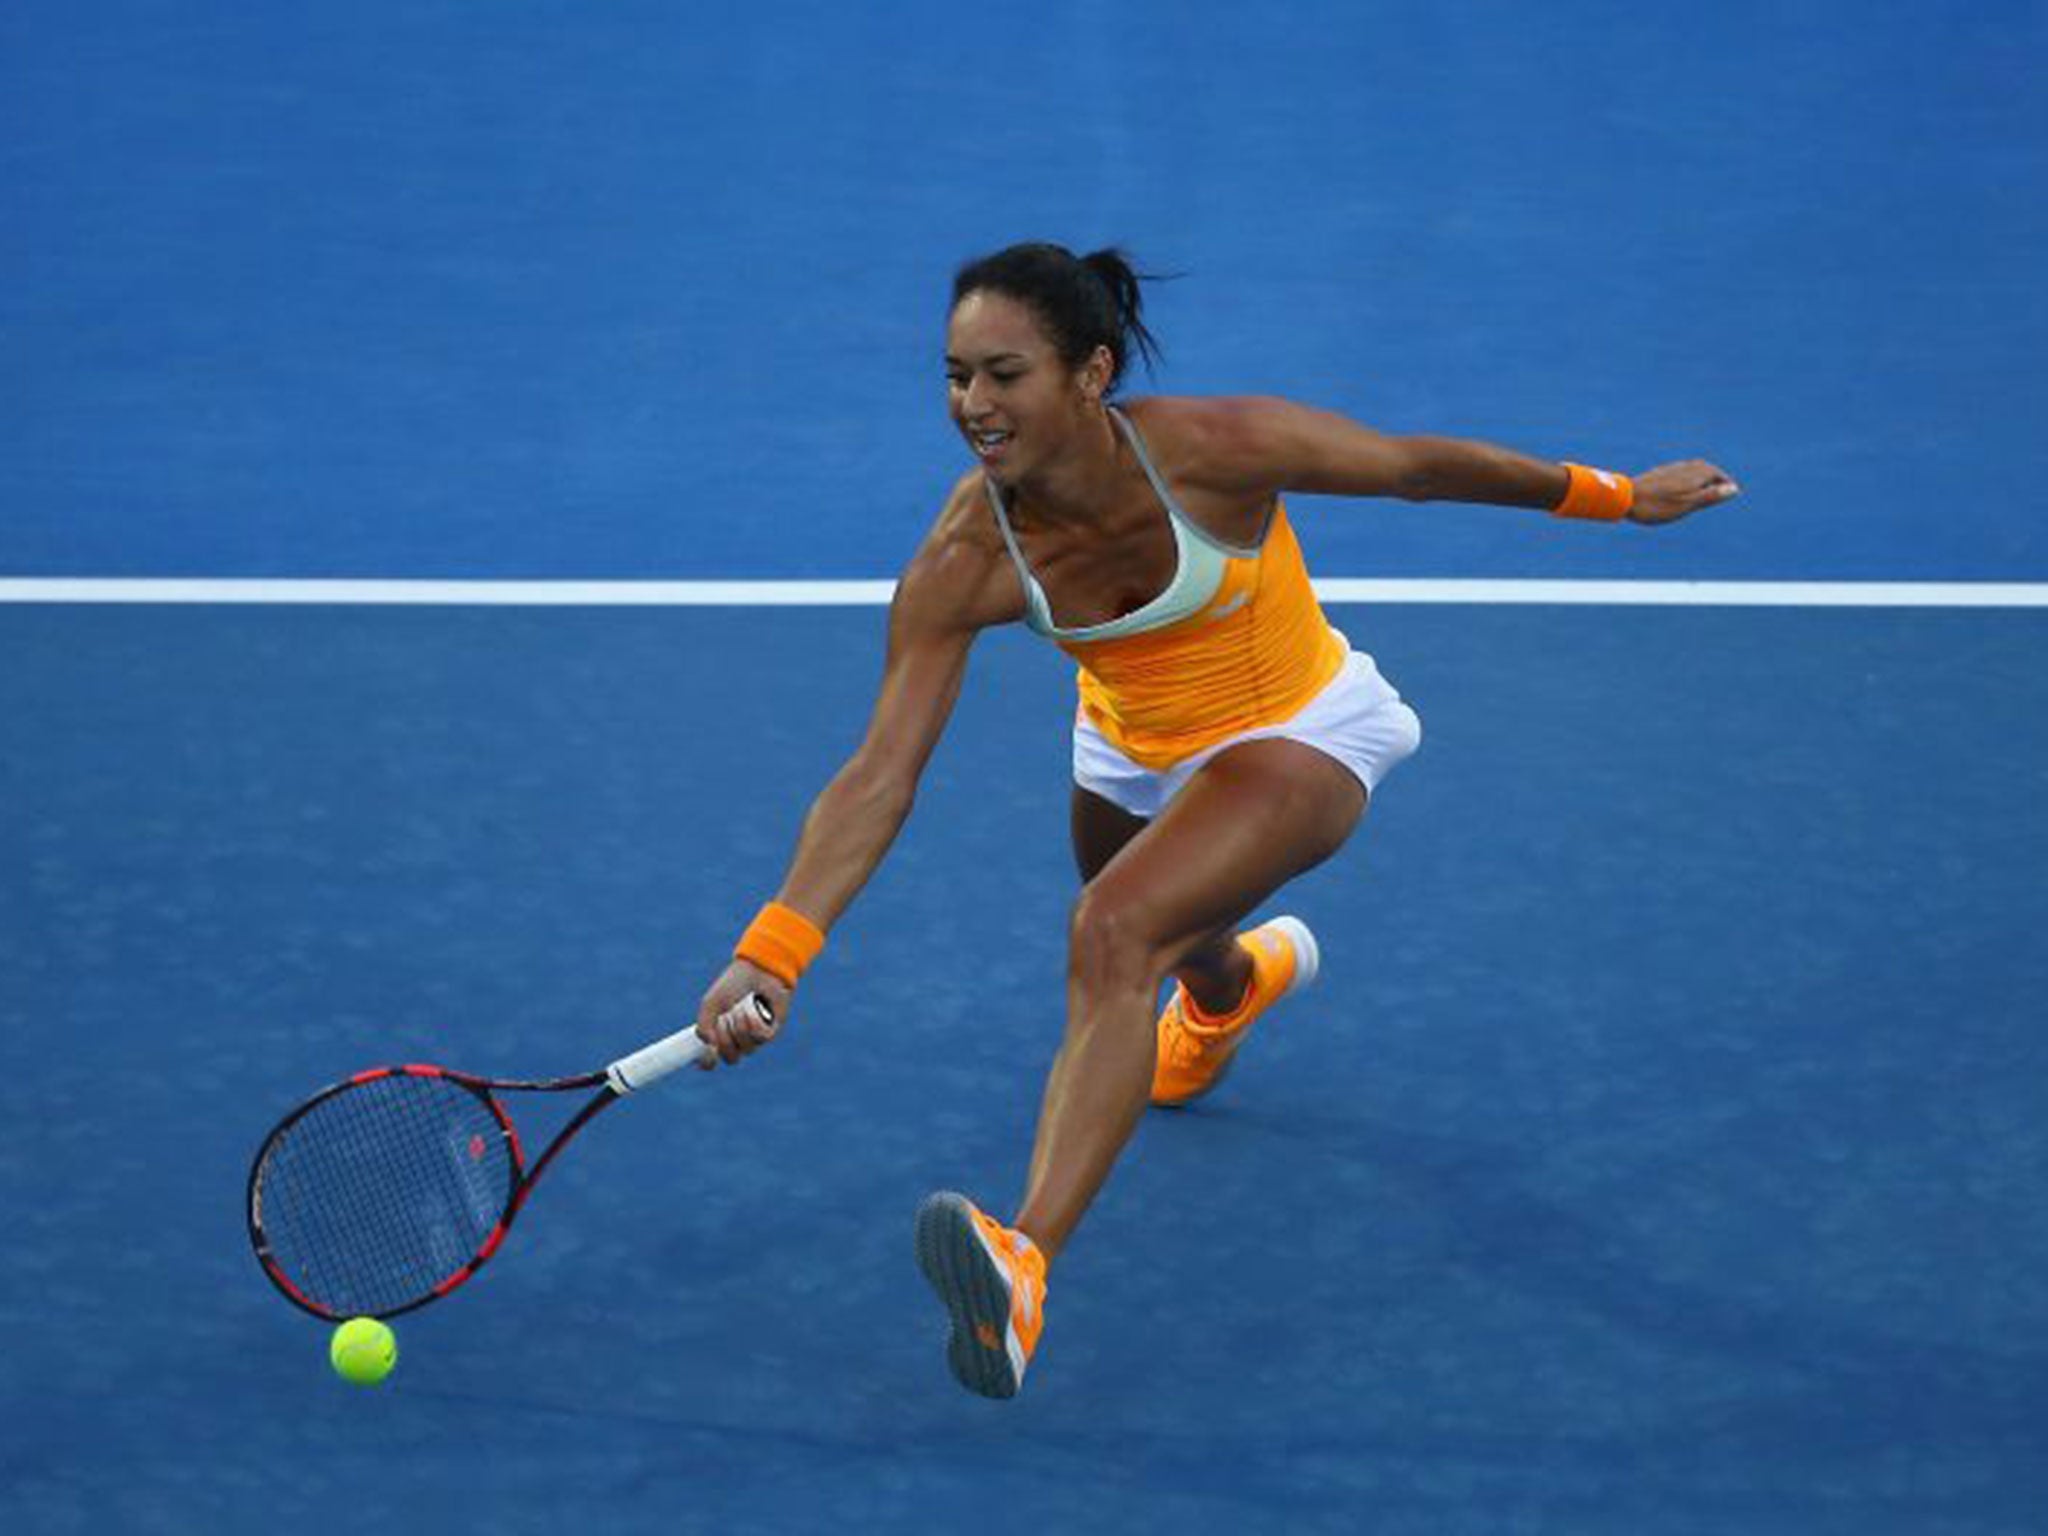 Heather Watson saved nine out of 10 break points in her win over Teliana Pereira